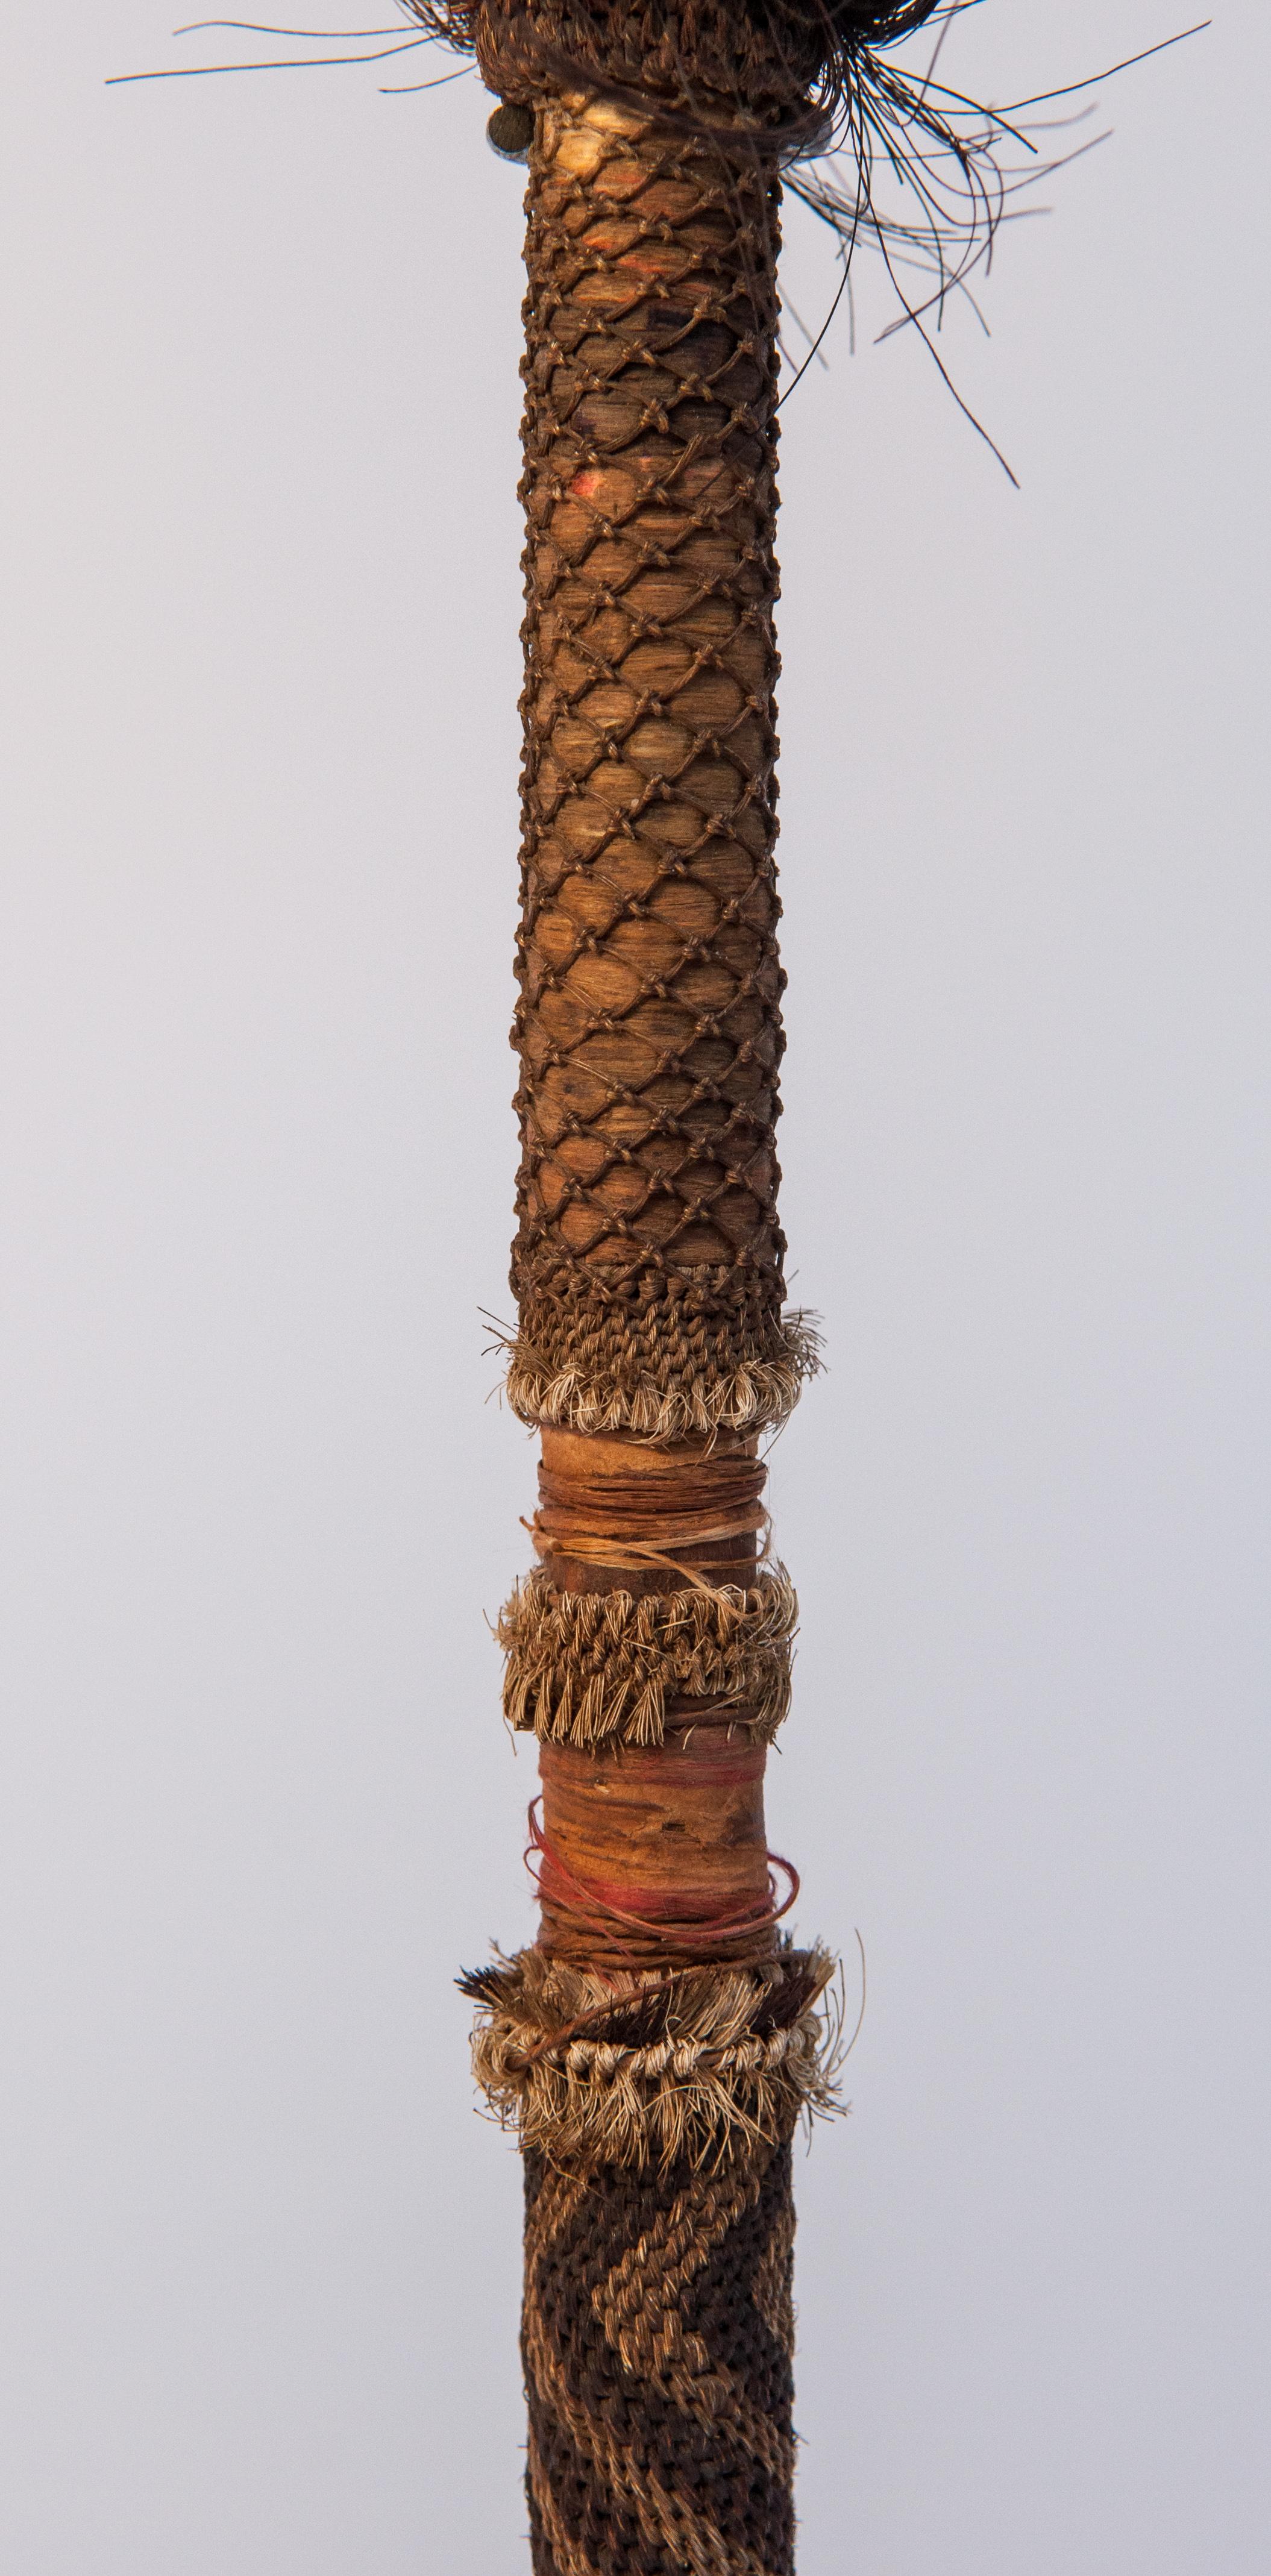 Pair of Horsehair Fly Whisks, Yi of Yunnan, China, Early to Mid-20th Century 7